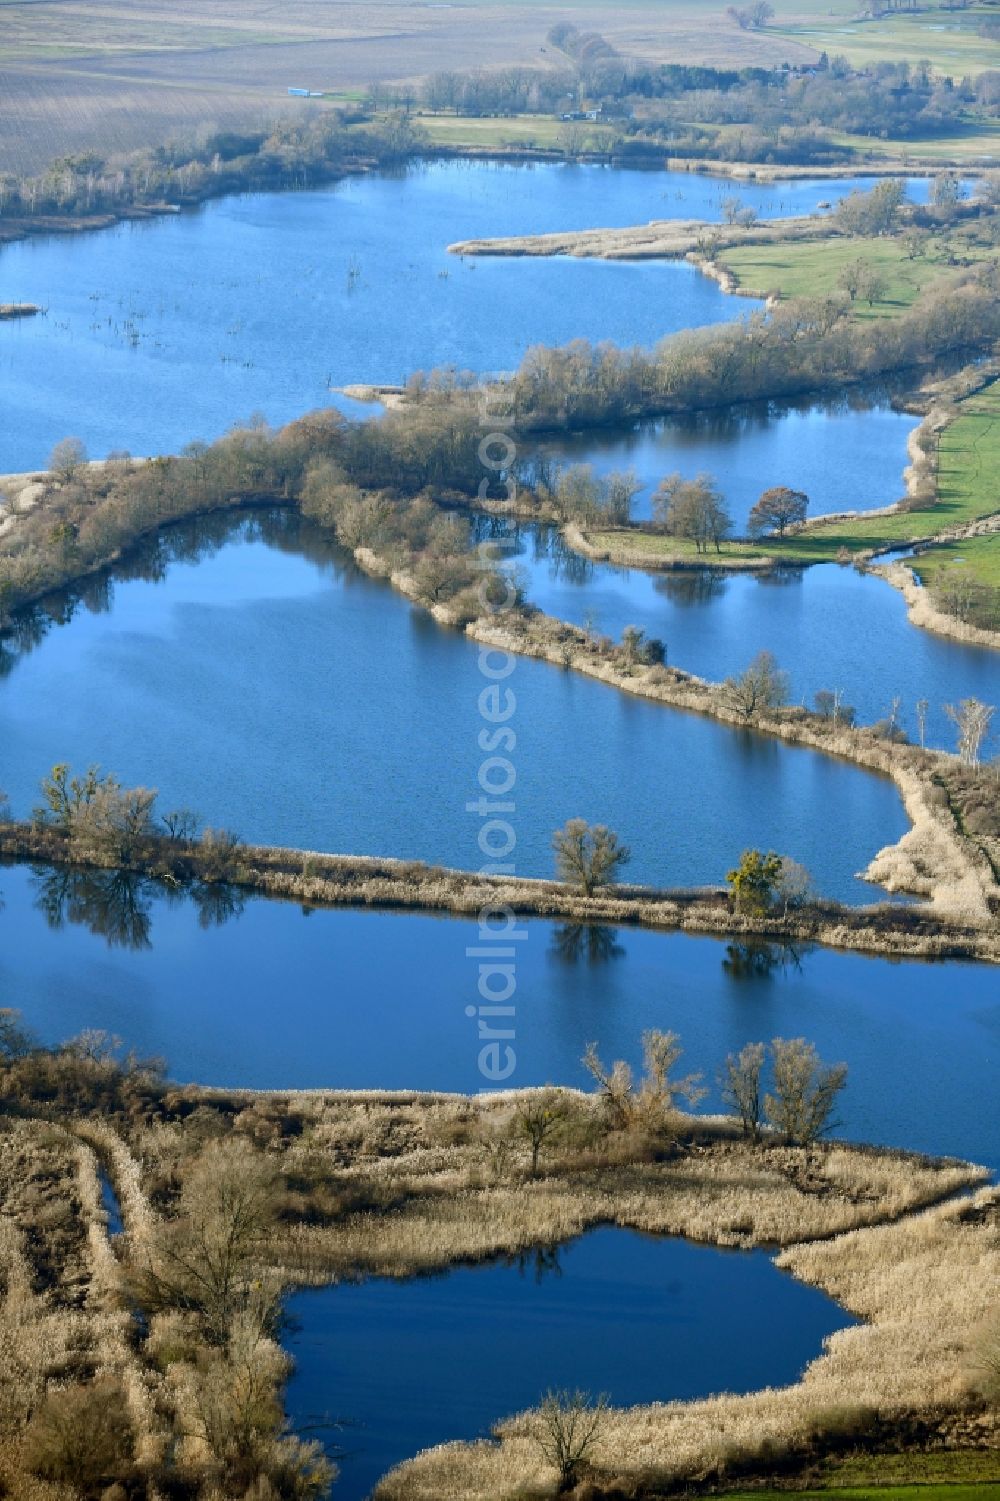 Ribbeck from the bird's eye view: Shore areas of the ponds for fish farming Langer Stich in Ribbeck in the state Brandenburg, Germany